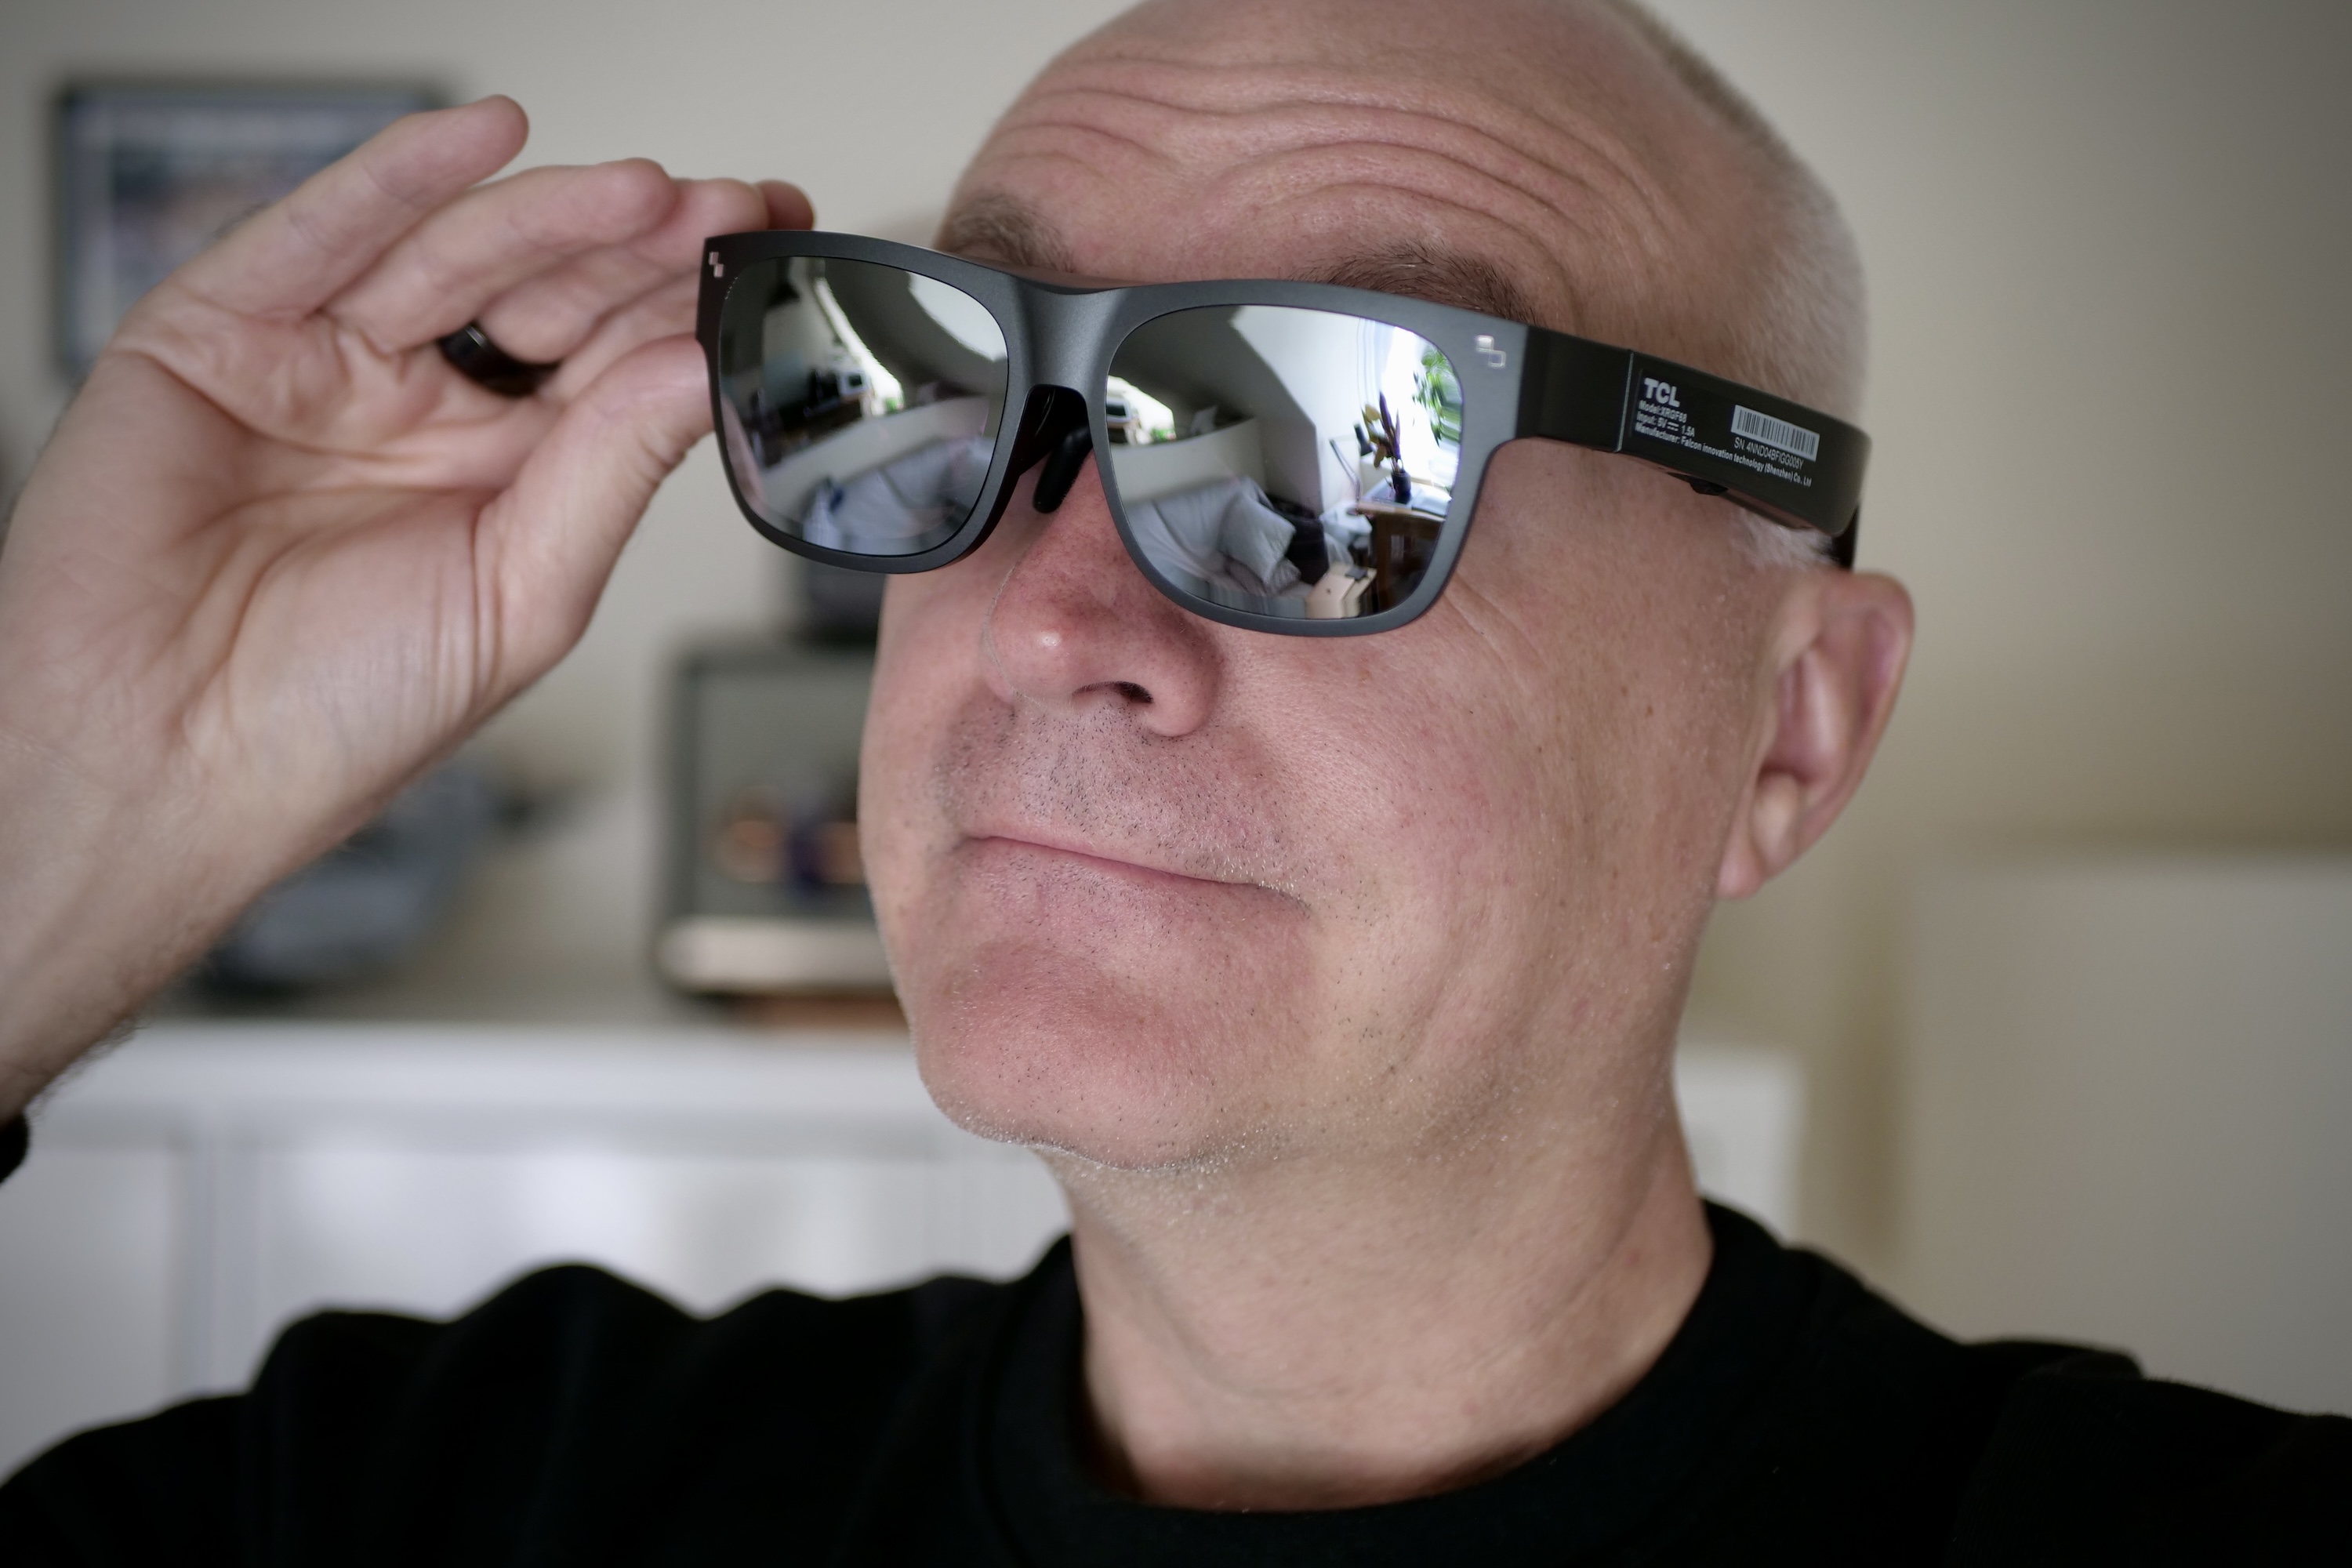 I wore smart glasses that made me excited for the future